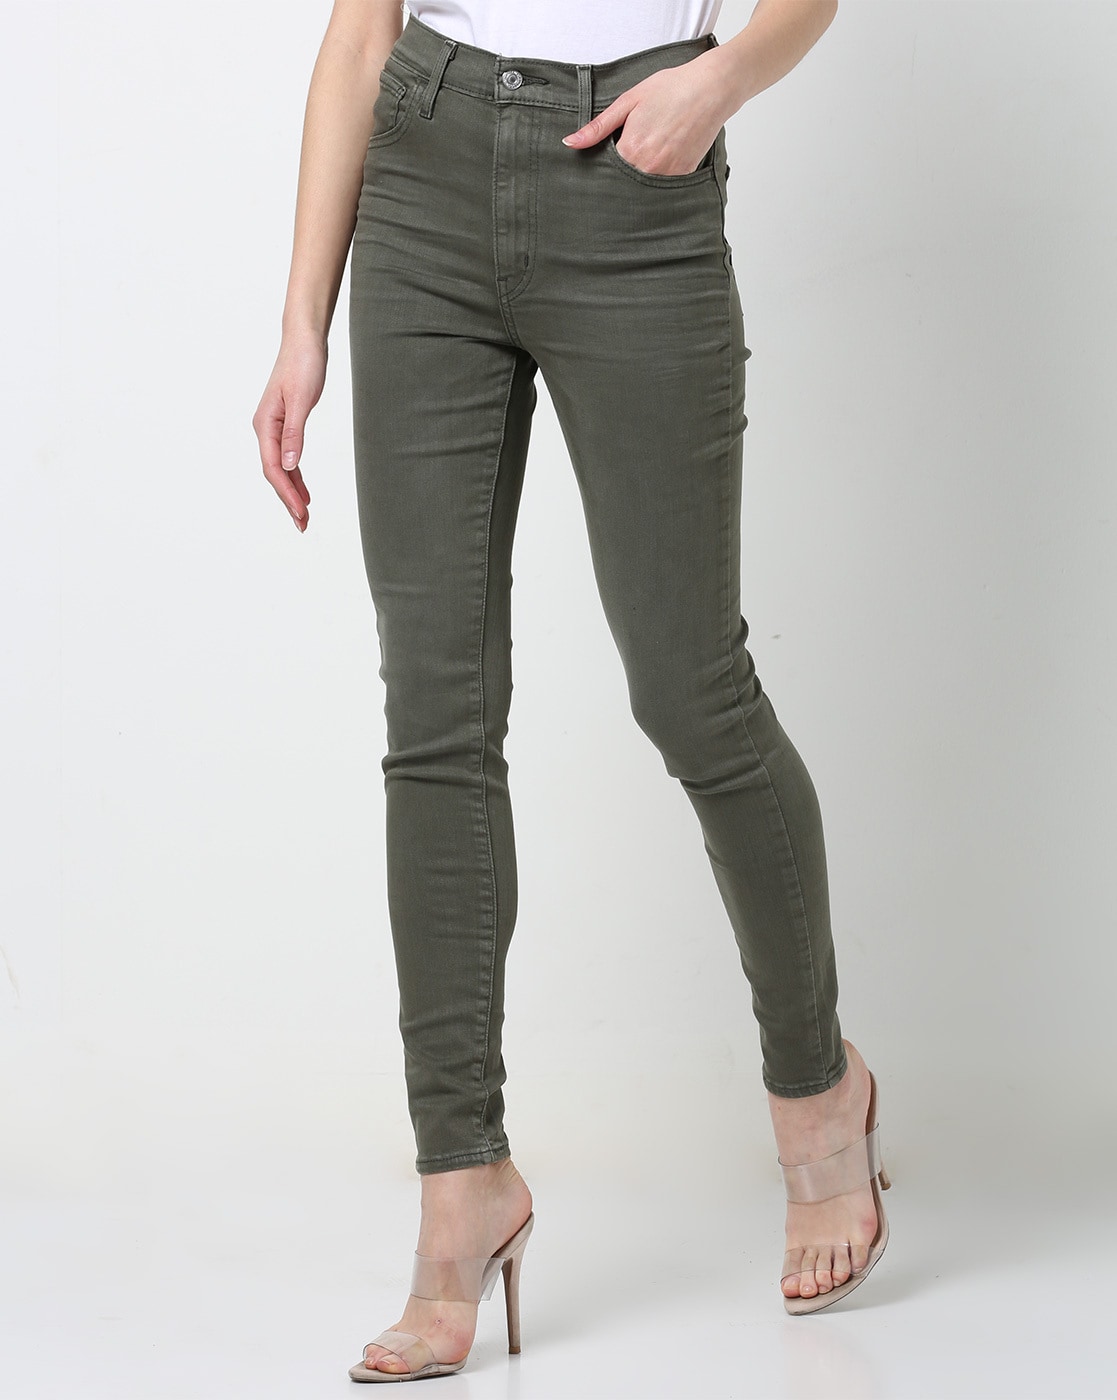 olive green jeans for ladies